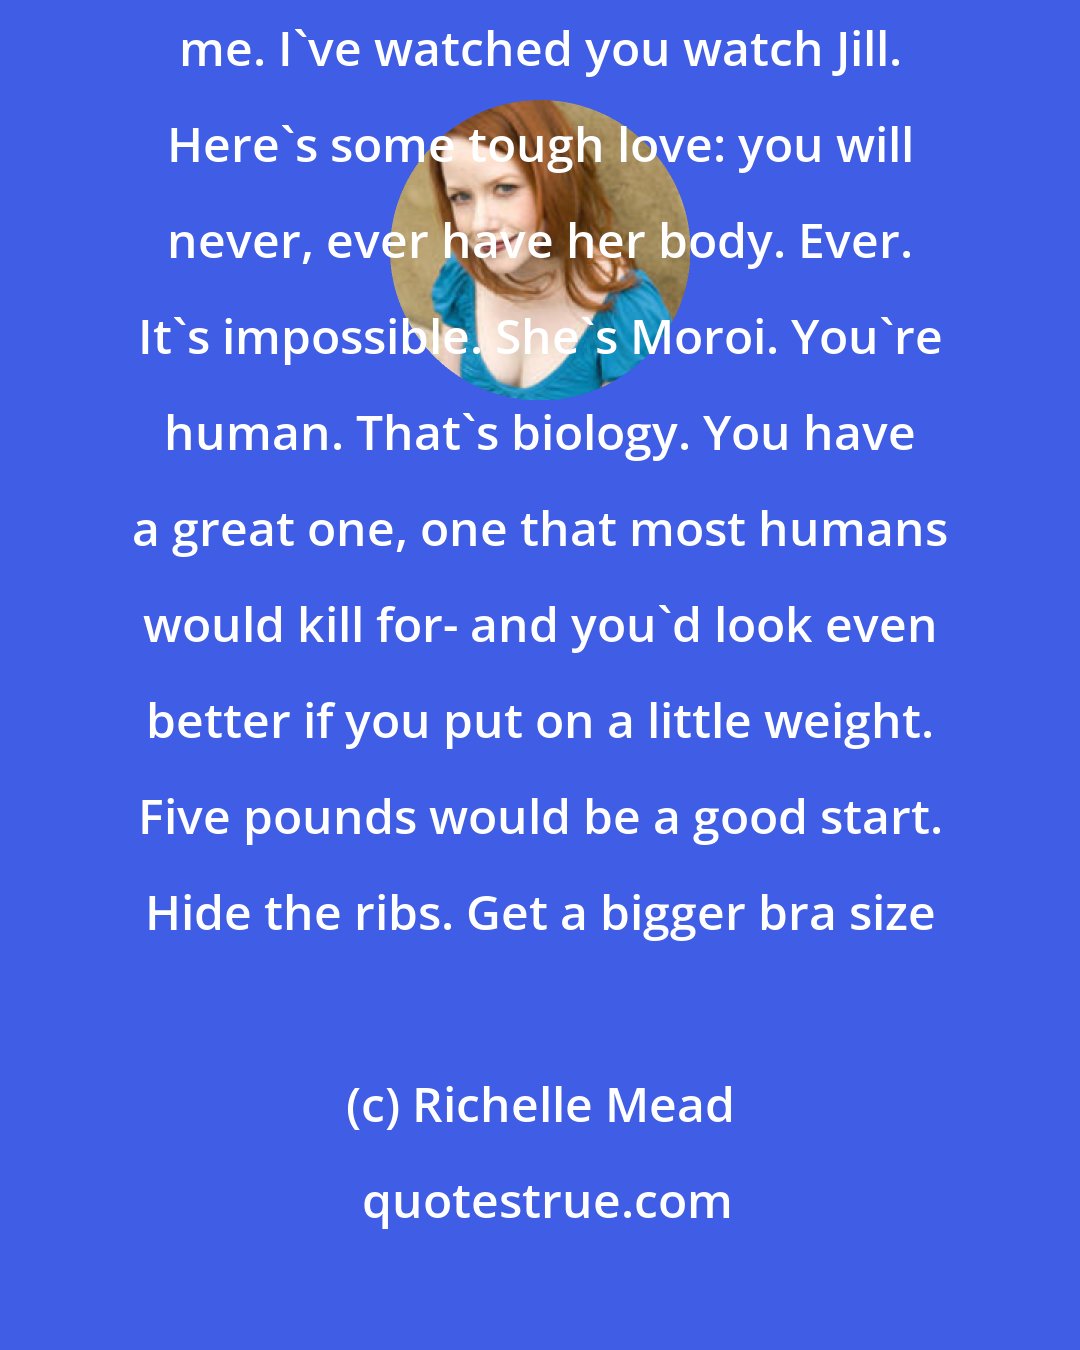 Richelle Mead: Maybe everyone else thinks your aversion to food is cute- but not me. I've watched you watch Jill. Here's some tough love: you will never, ever have her body. Ever. It's impossible. She's Moroi. You're human. That's biology. You have a great one, one that most humans would kill for- and you'd look even better if you put on a little weight. Five pounds would be a good start. Hide the ribs. Get a bigger bra size